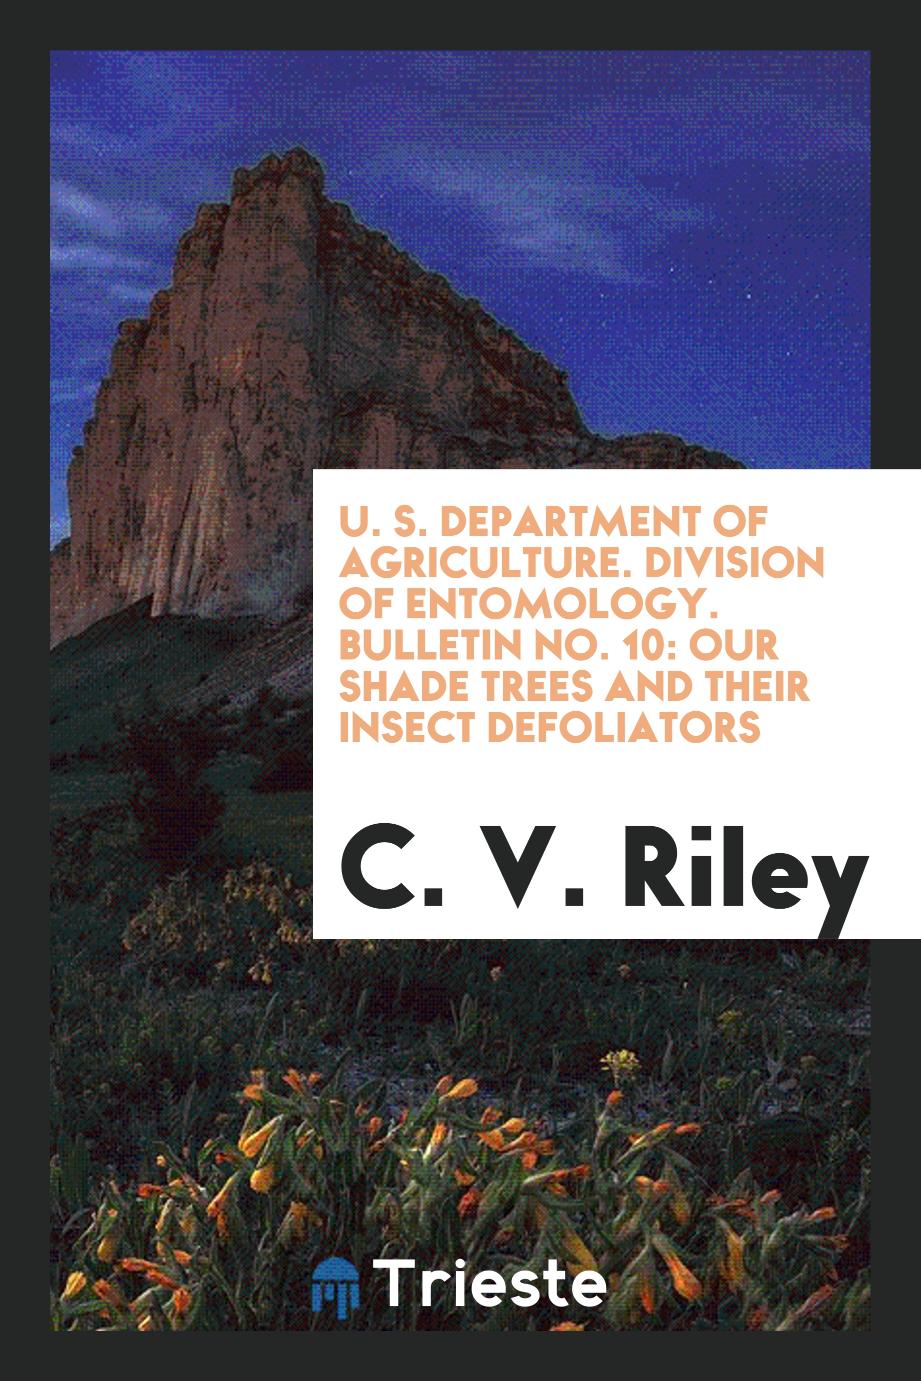 U. S. Department of agriculture. Division of entomology. Bulletin No. 10: Our shade trees and their insect defoliators